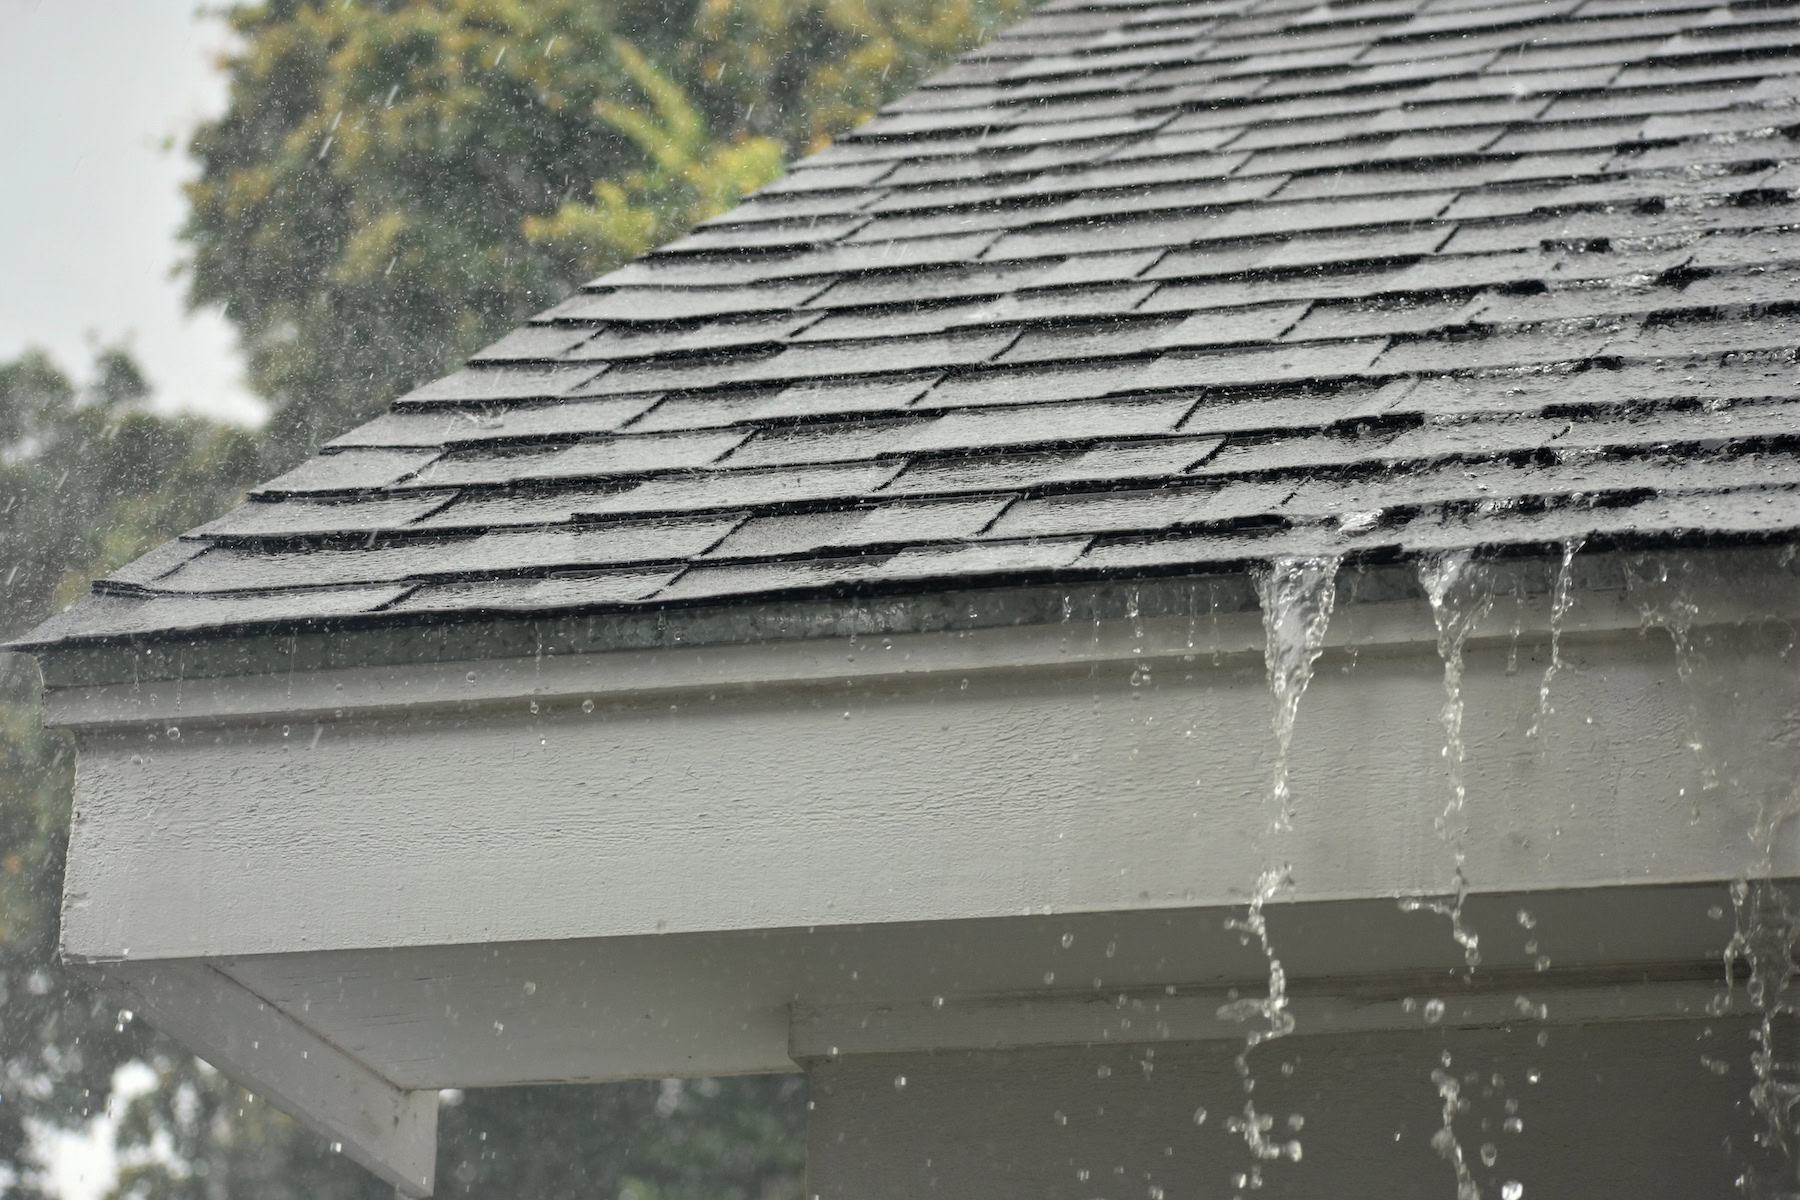 Asphalt shingle roof without gutters with rainwater pouring over edge